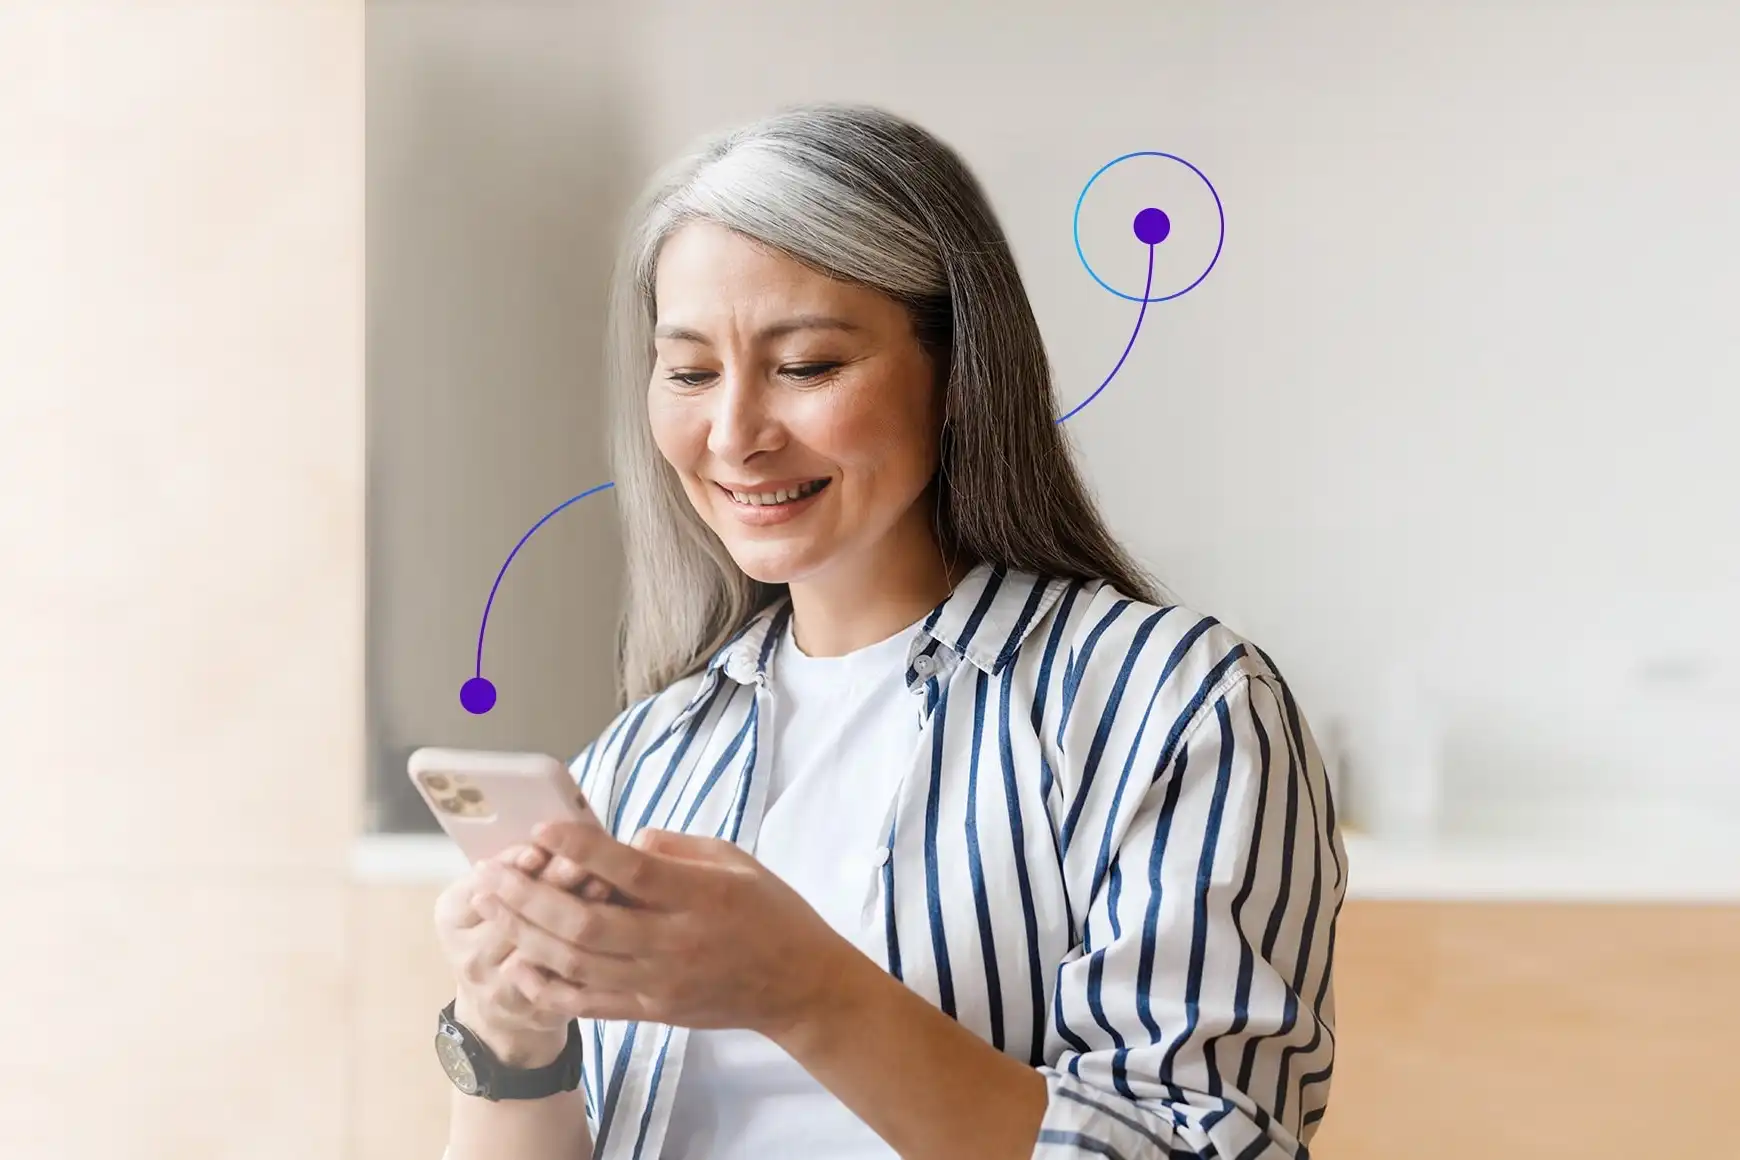 Apple Federal Credit Union uses Talkdesk to build empathy and connection.